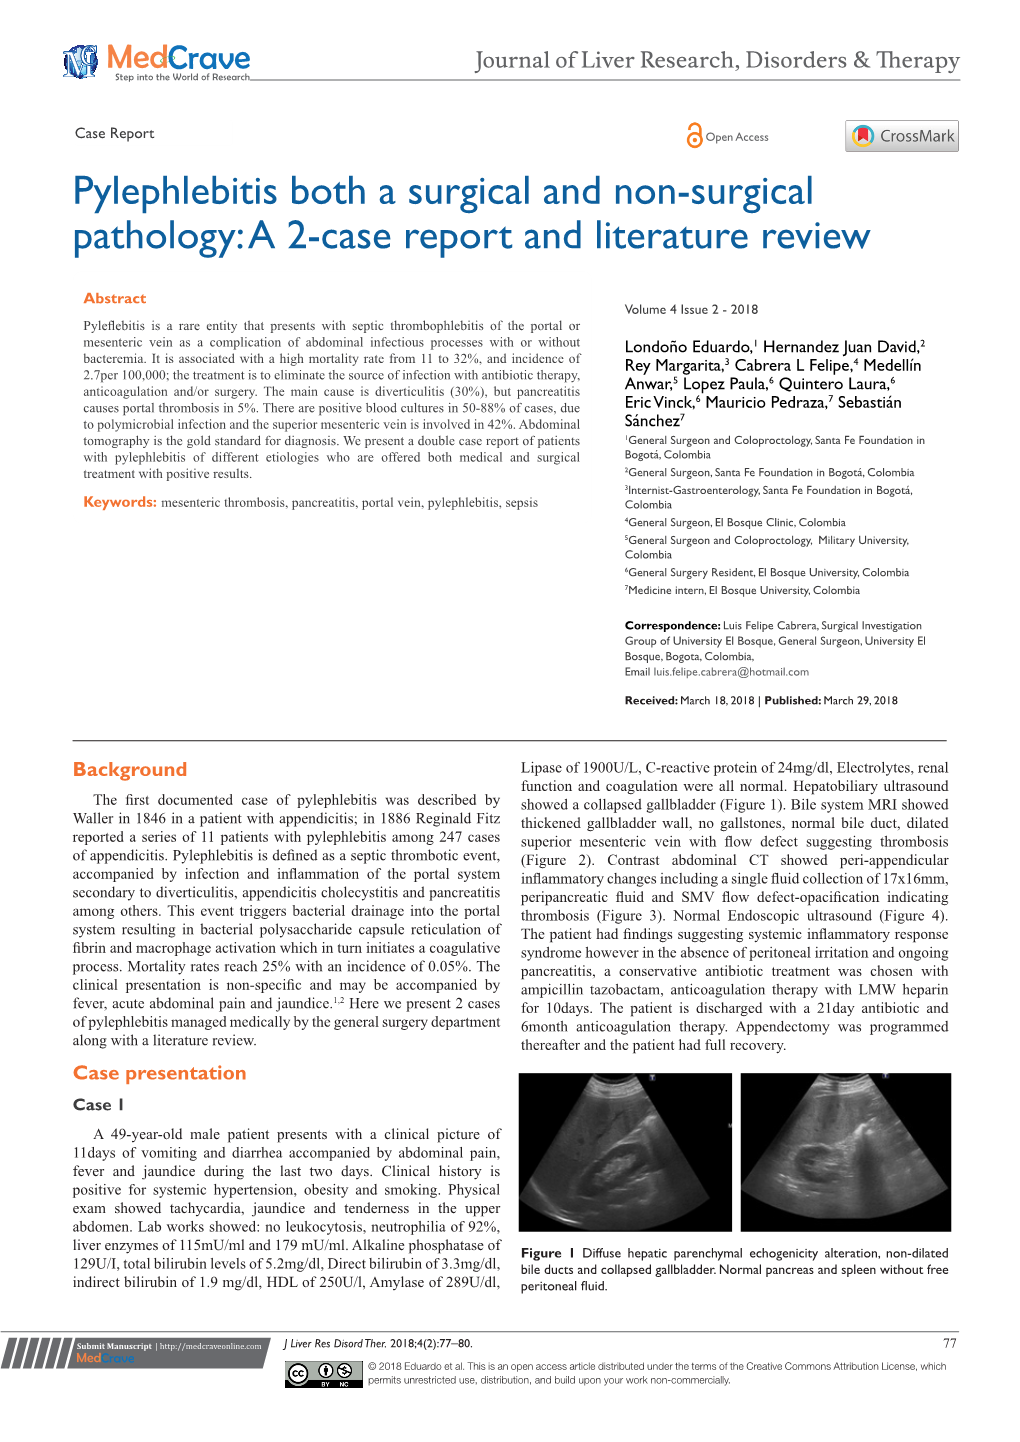 Pylephlebitis Both a Surgical and Non-Surgical Pathology: a 2-Case Report and Literature Review